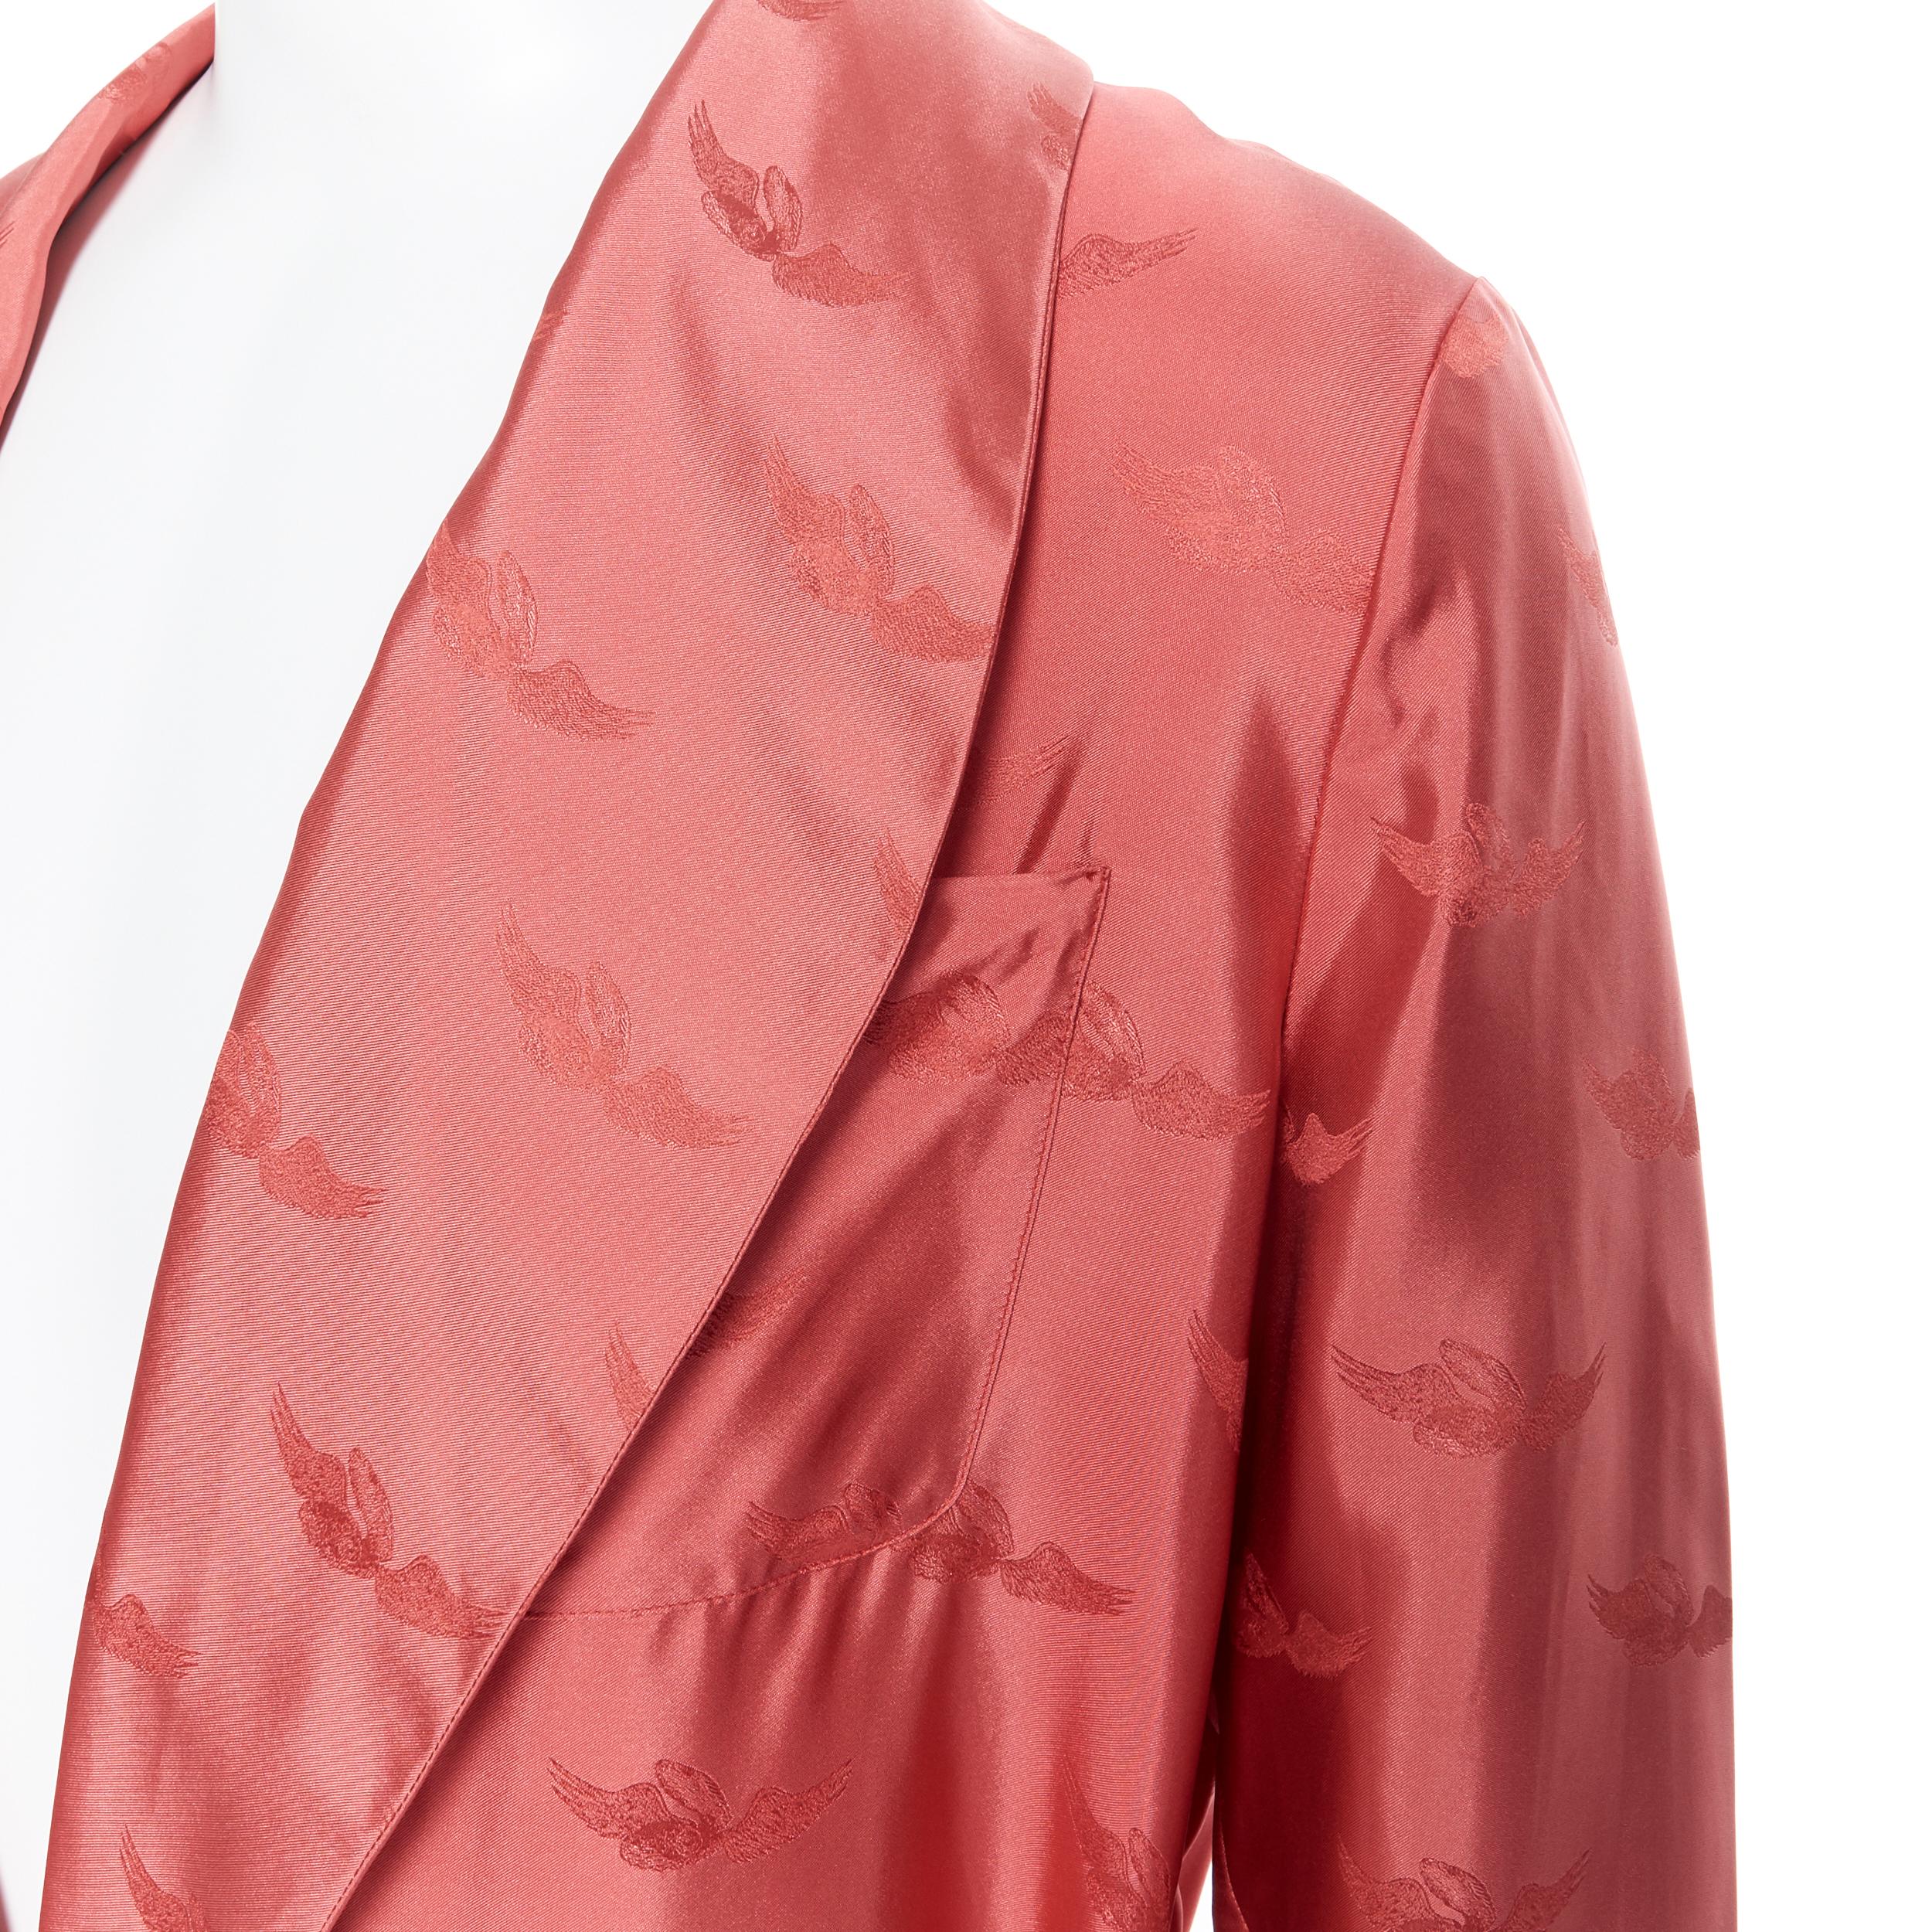 new LA PERLA MENSWEAR Runway red silk winged jacquard shawl collar belted robe 
Brand: La Perla
Collection: Spring Summer 2015
Model Name / Style: Silk robe
Material: Silk
Color: Red
Pattern: Abstract; winged jacquard
Extra Detail: Can be worn